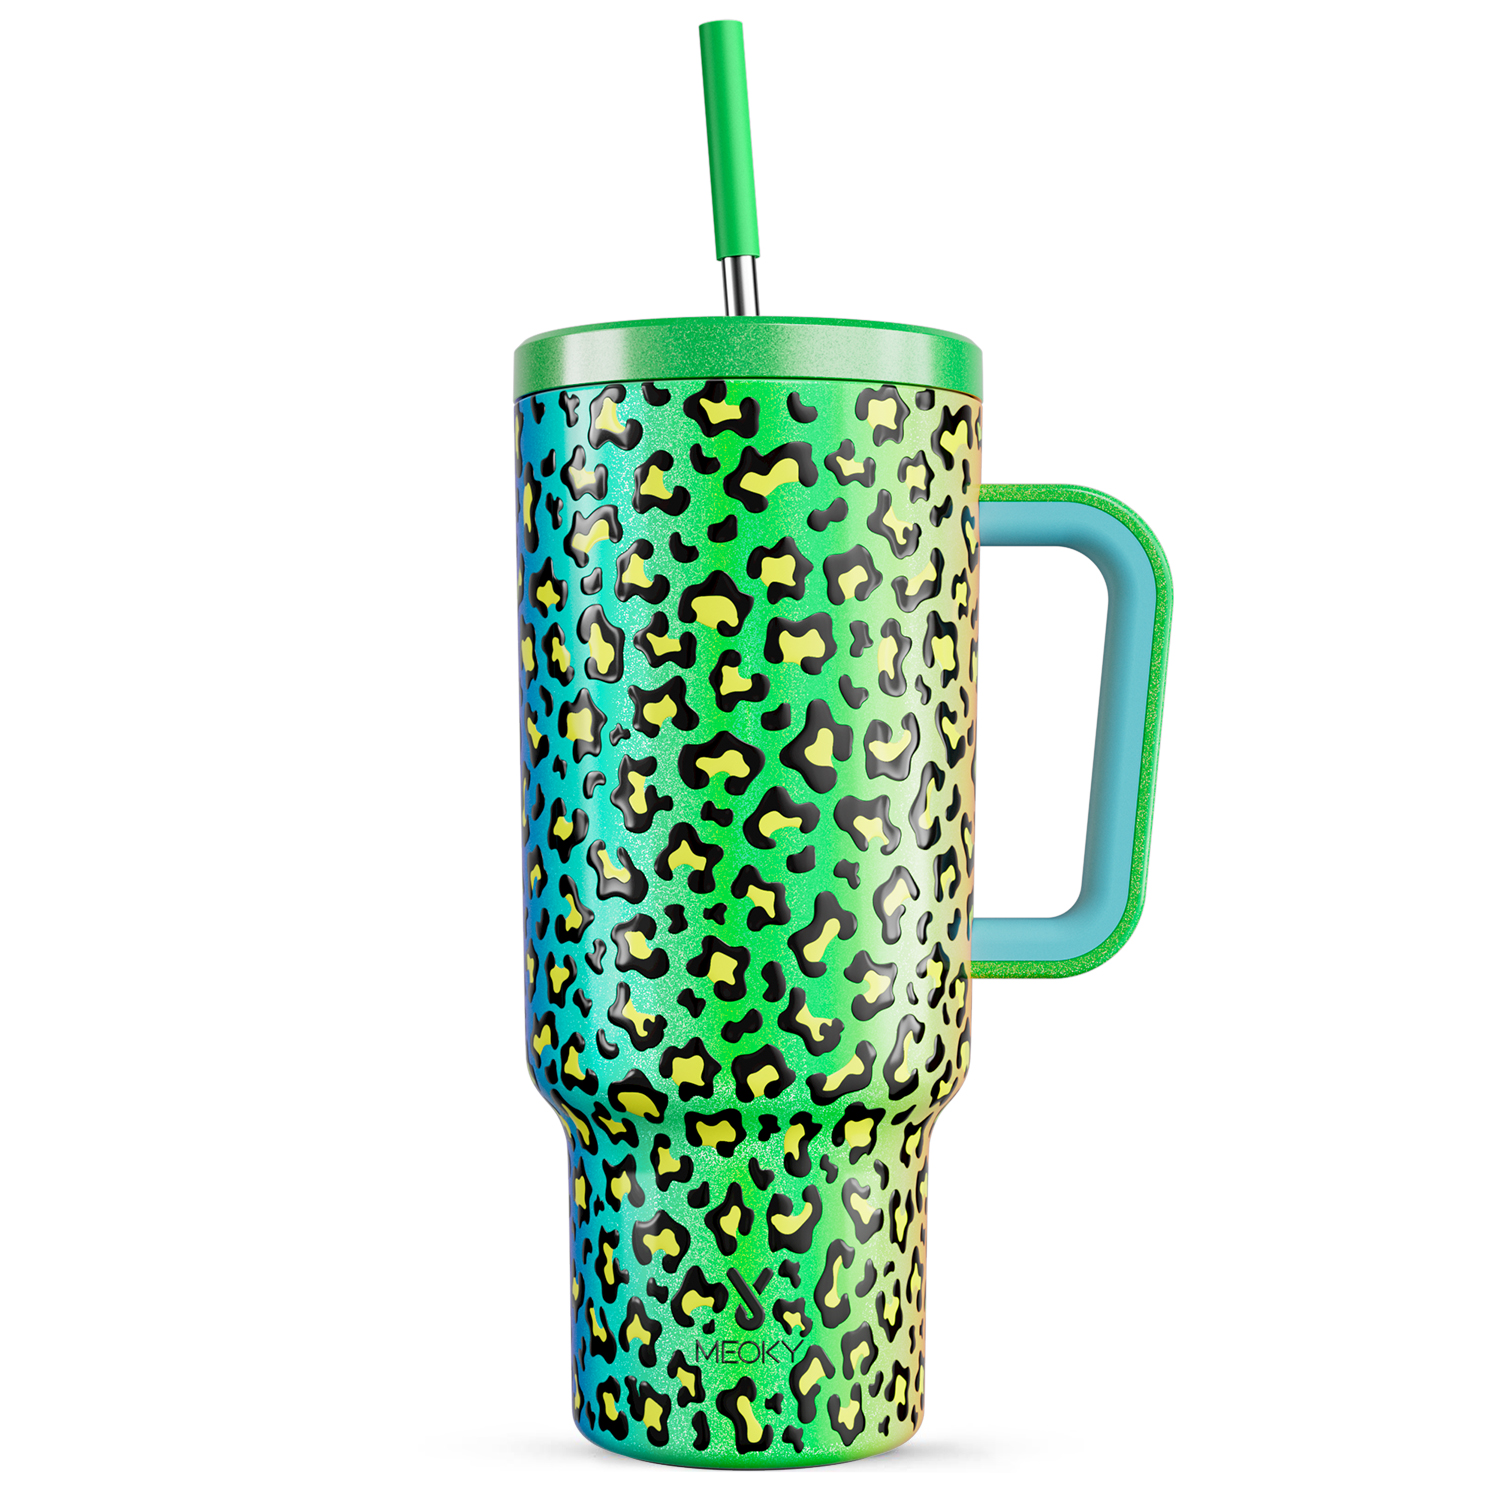 Meoky 40oz Tumbler with Handle and Straw Lid - Saint Patrick's Day